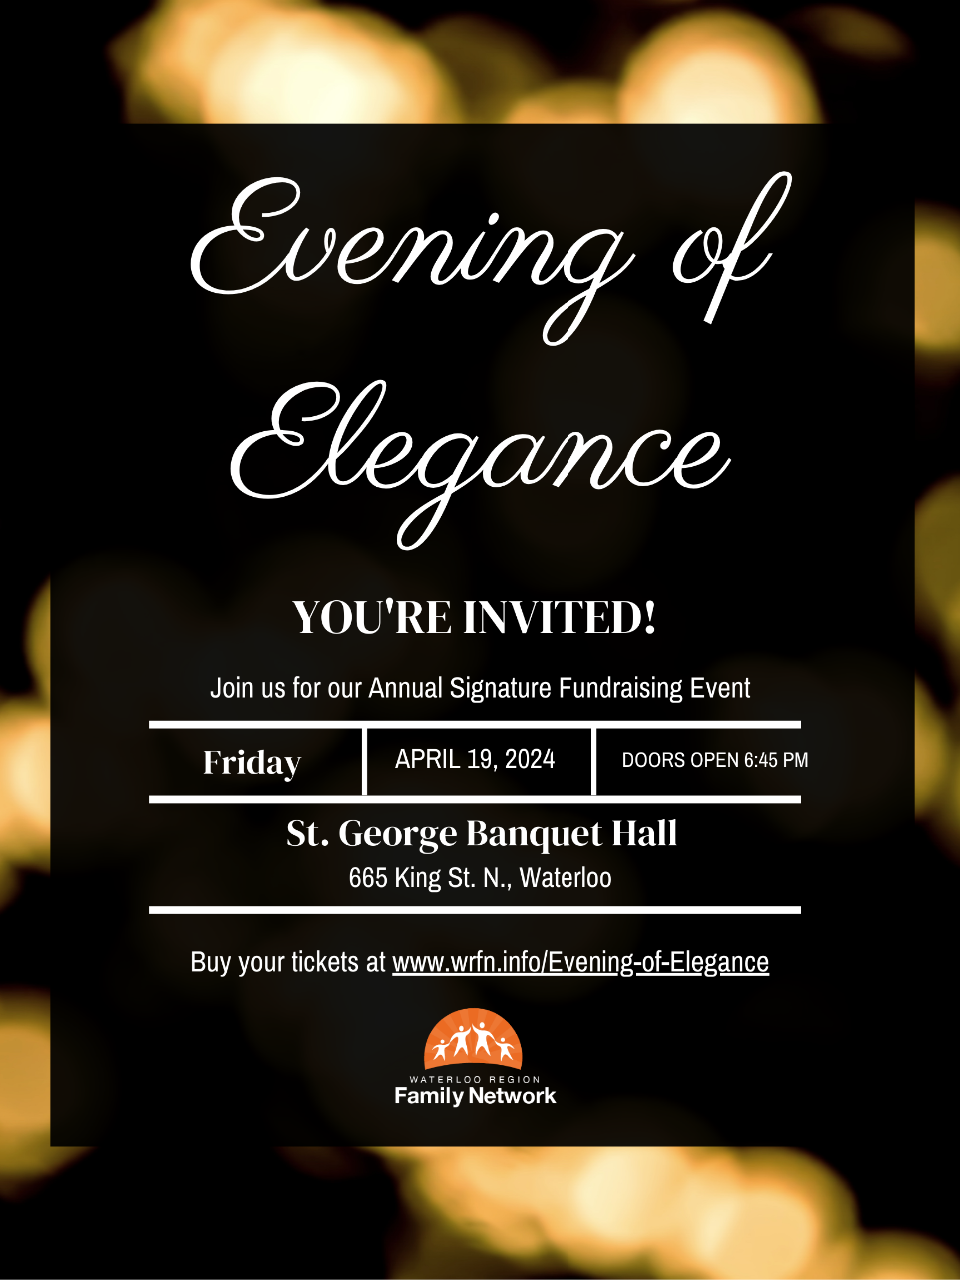 Evening of Elegance Save the Date. Join us for our Annual Signature Fundraising event. Friday, April 19. St. George Banquet Hall (665 King St North, Waterloo) Tickets on sale now!